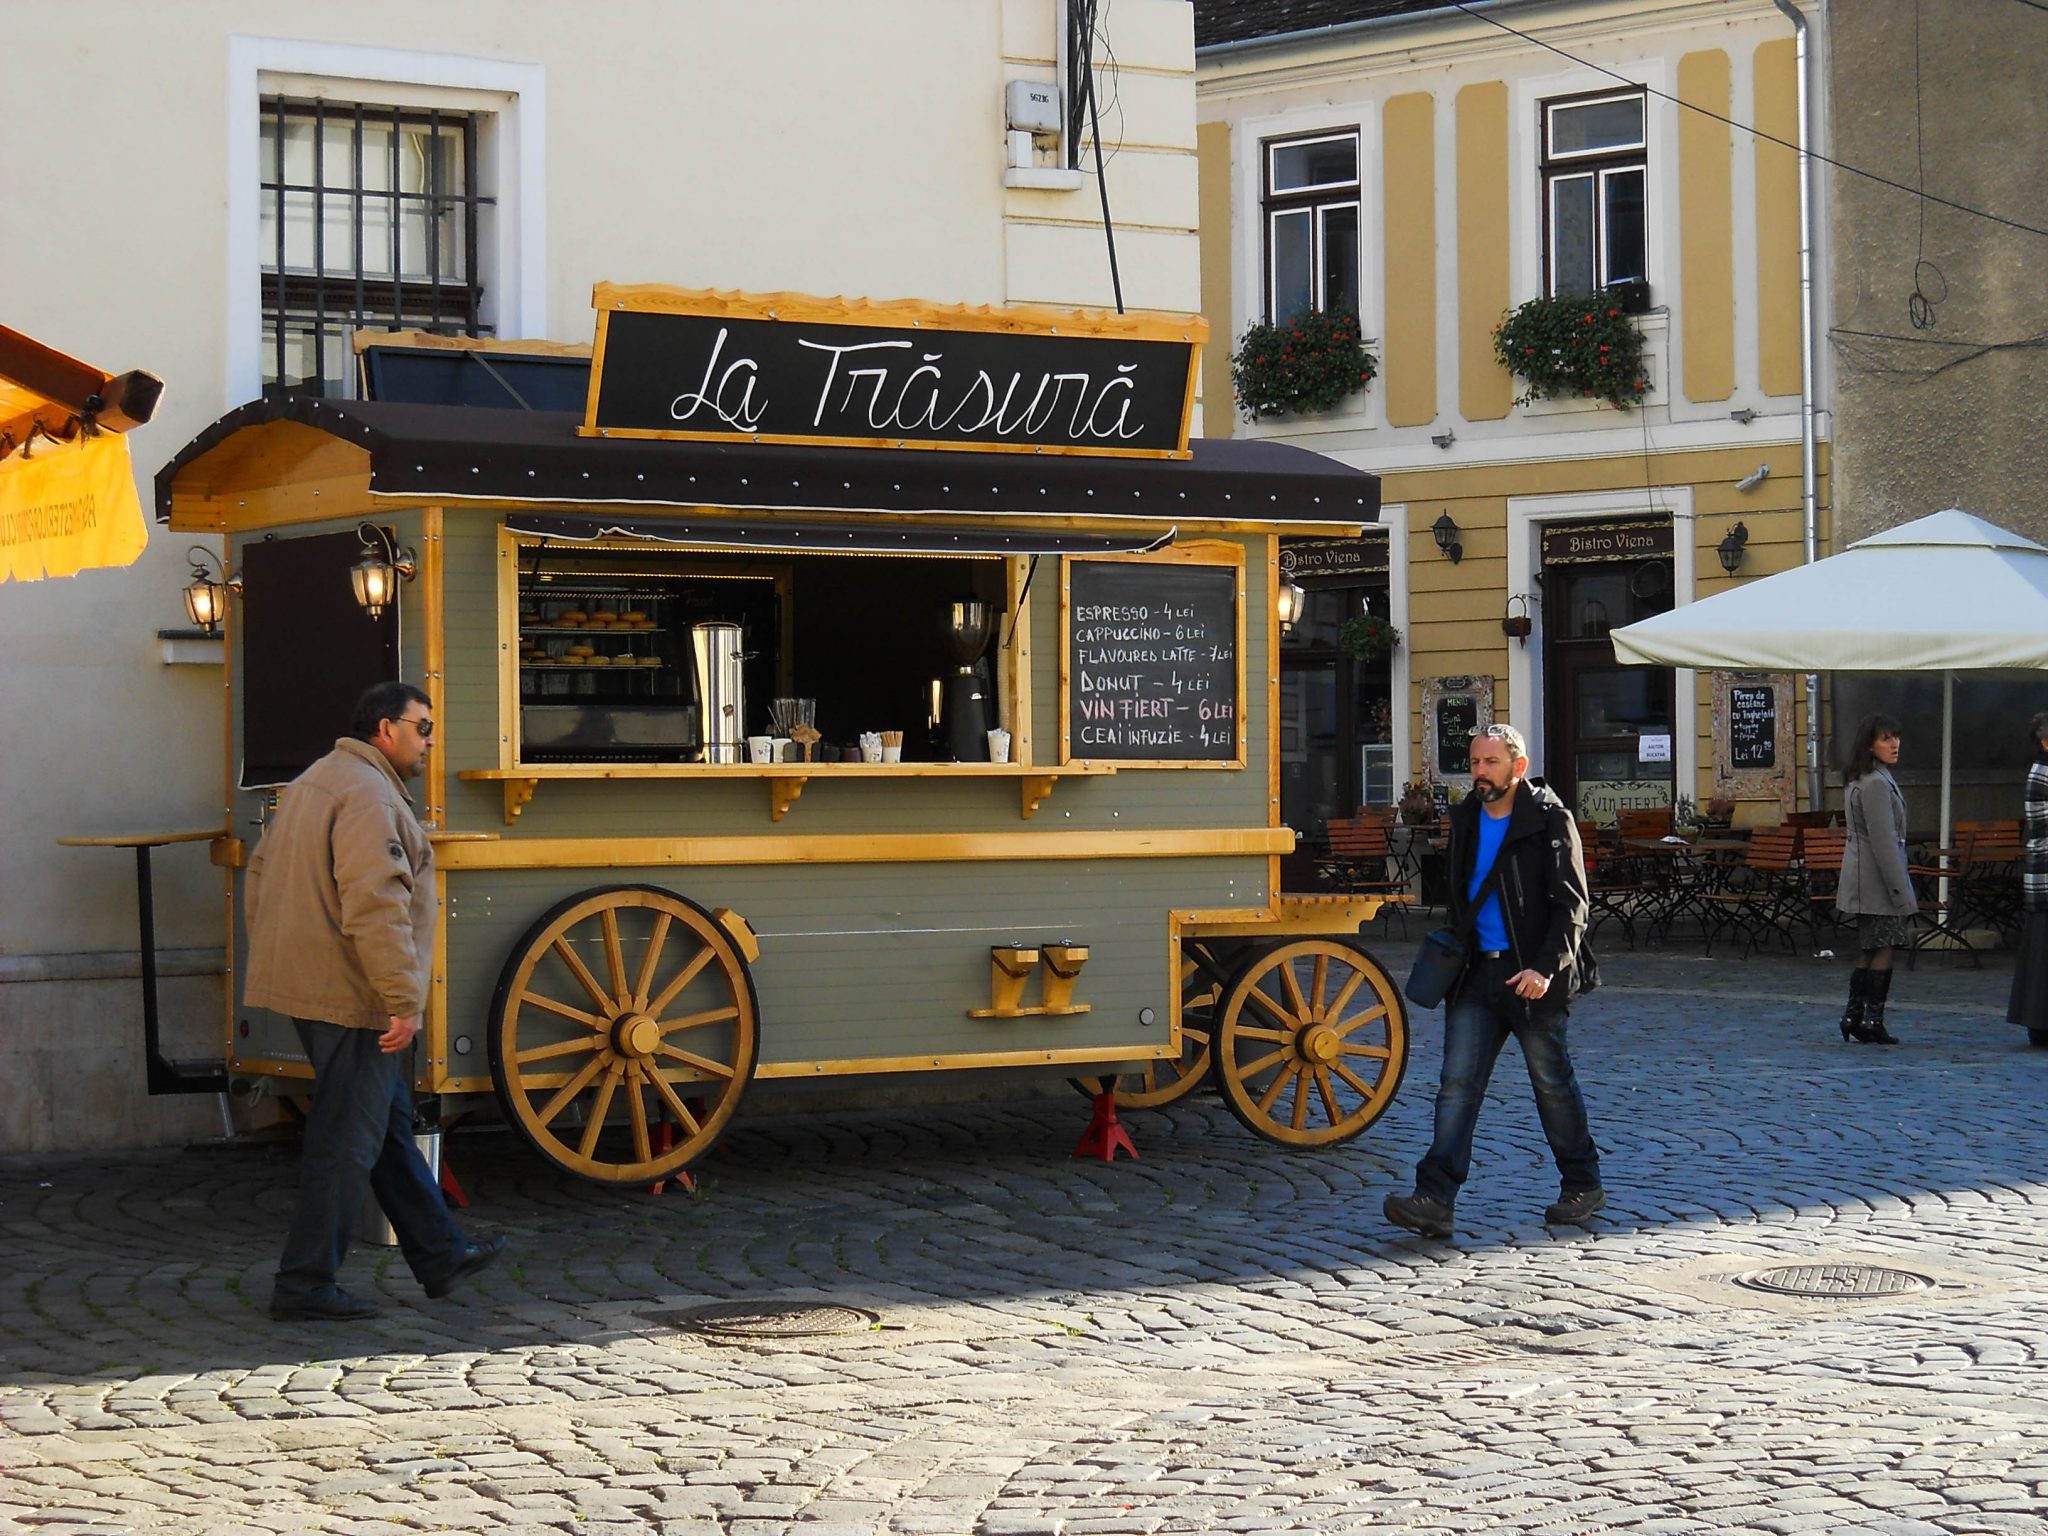 Coffee stall in old town centre - A complete travel guide to Cluj-Napoca